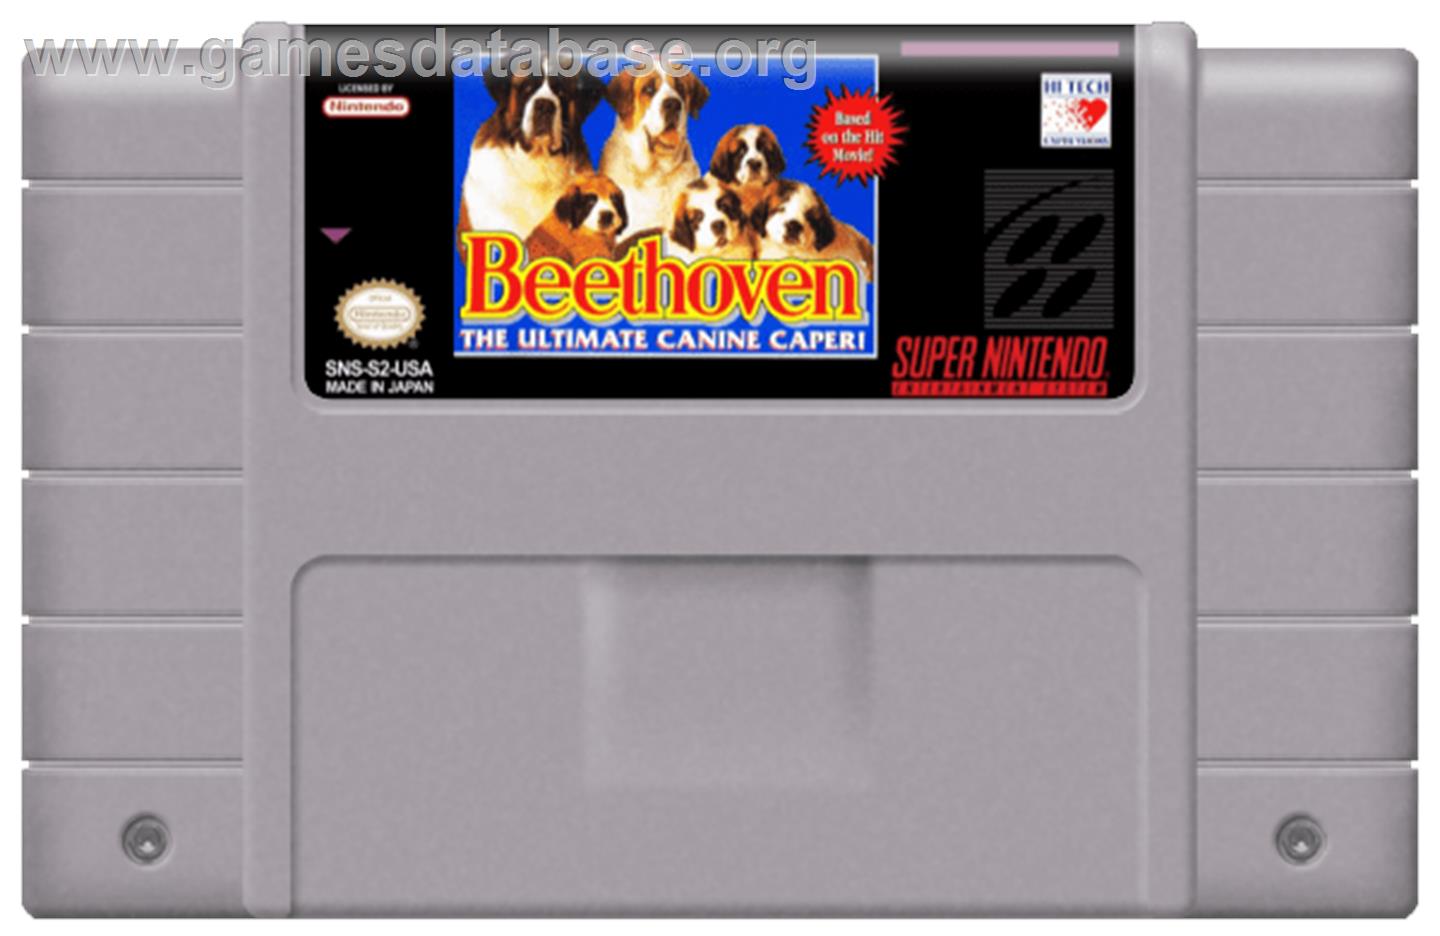 Beethoven's 2nd: The Ultimate Canine Caper! - Nintendo SNES - Artwork - Cartridge